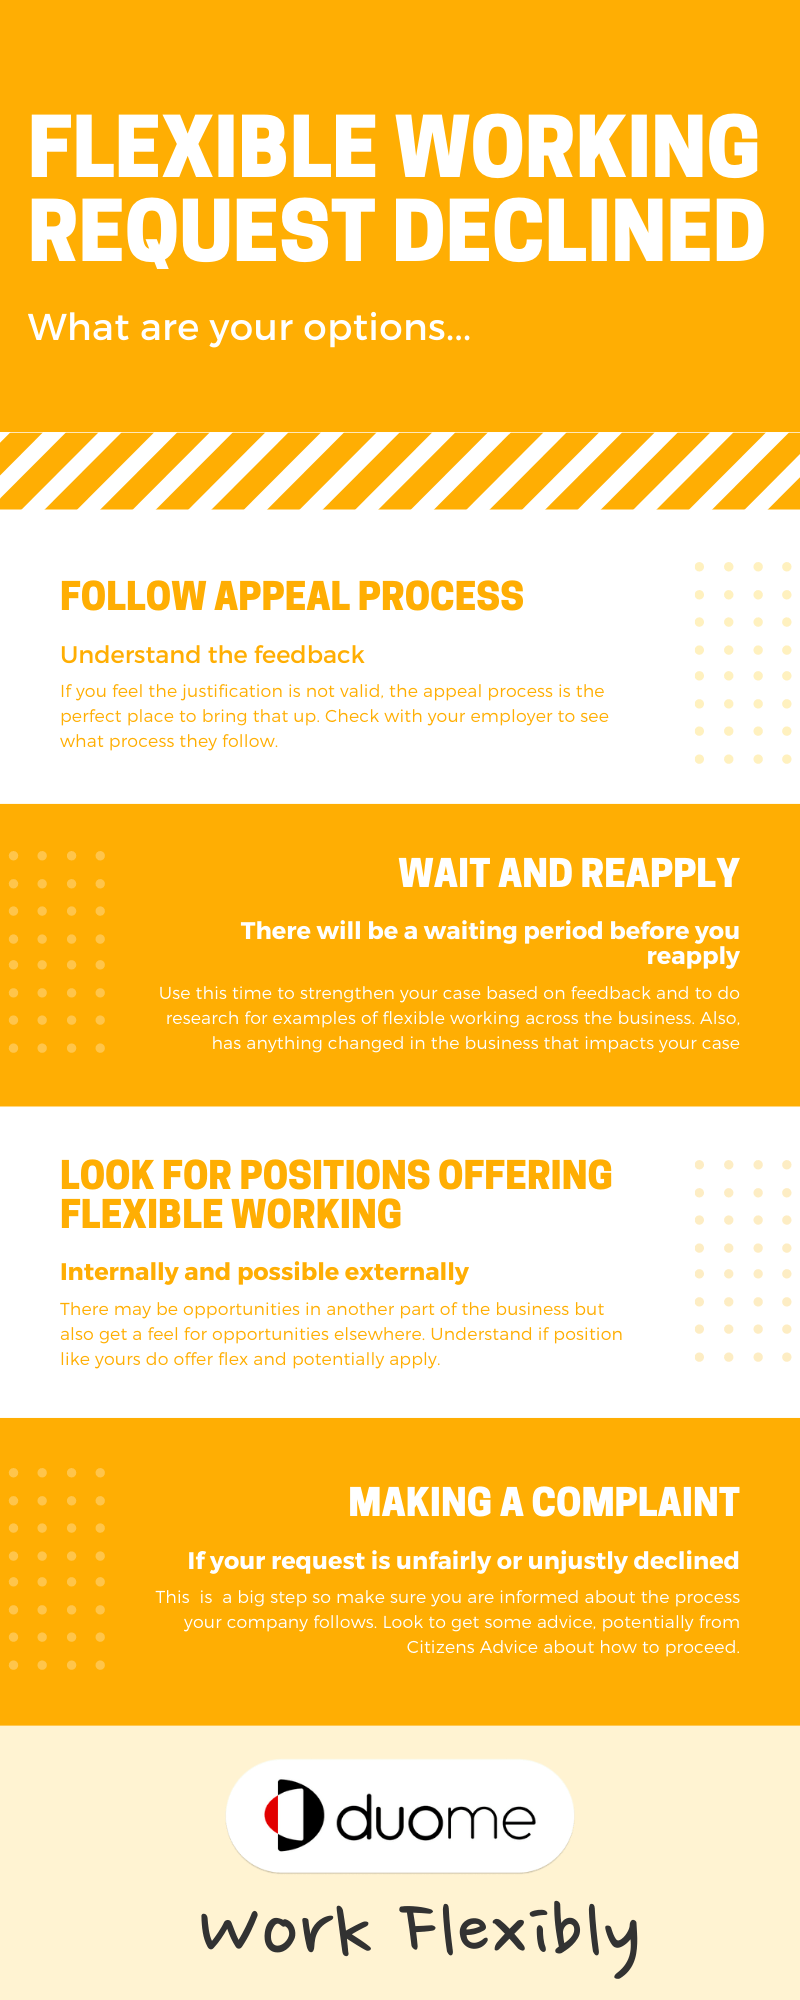 Flexible Working Request Declined, What Are My Options?